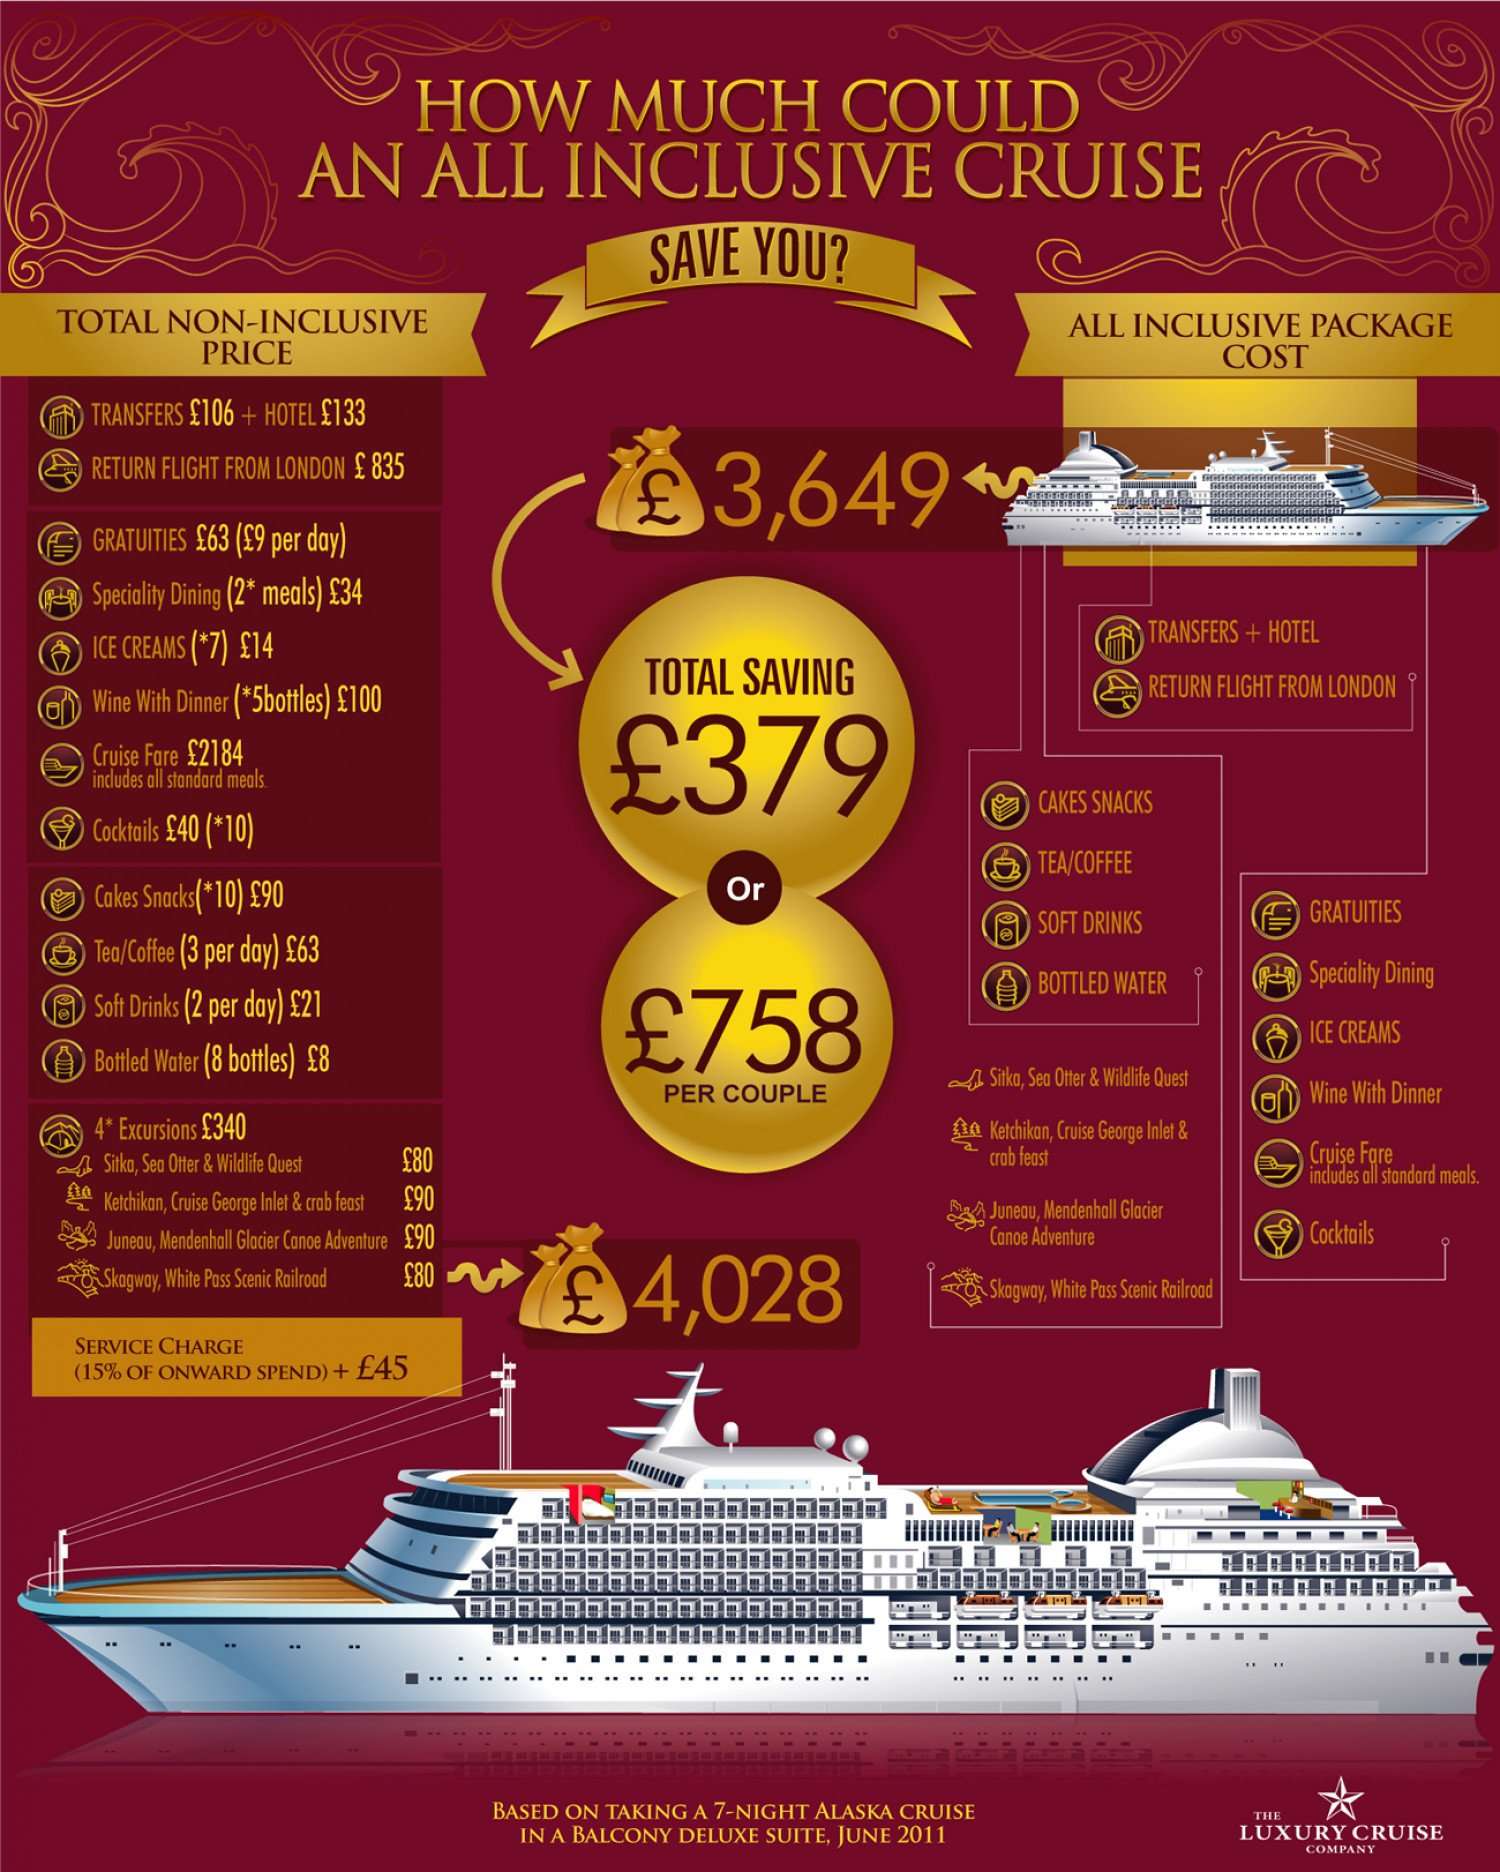 How much could an all inclusive cruise save you?